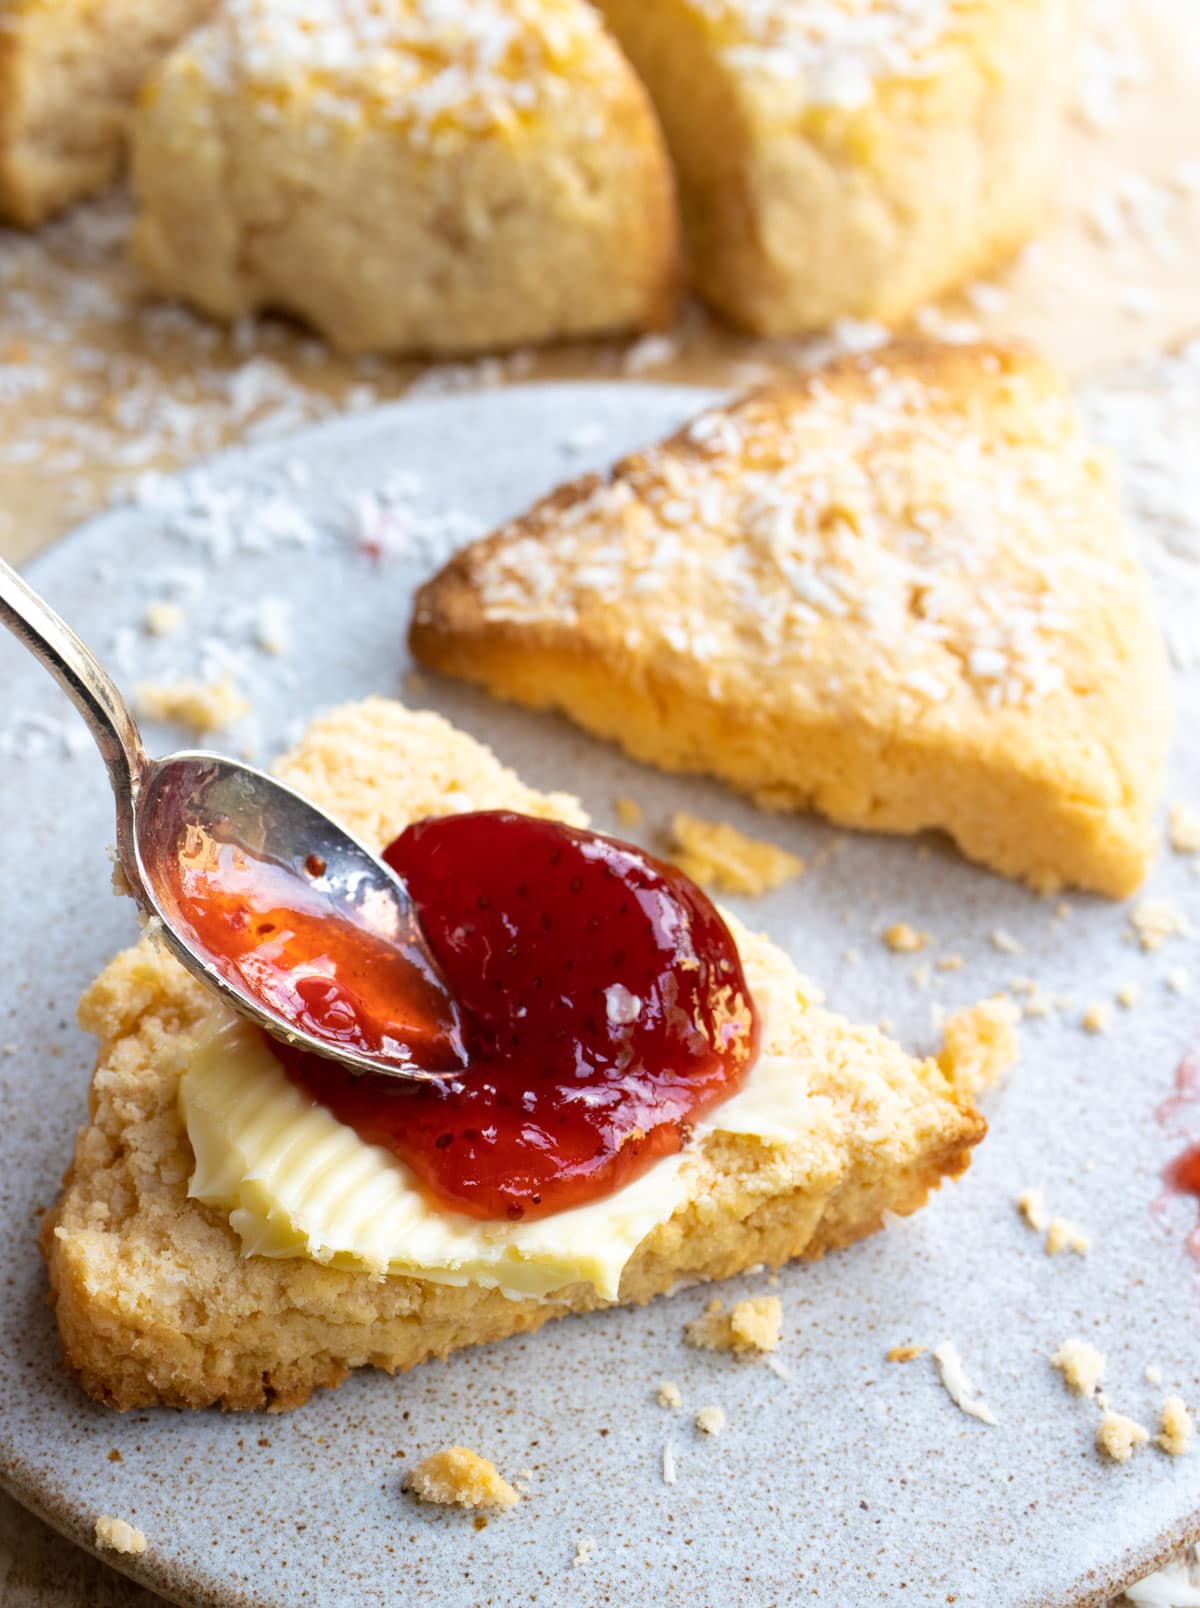 A scone sliced in half and topped with butter and strawberry jam.